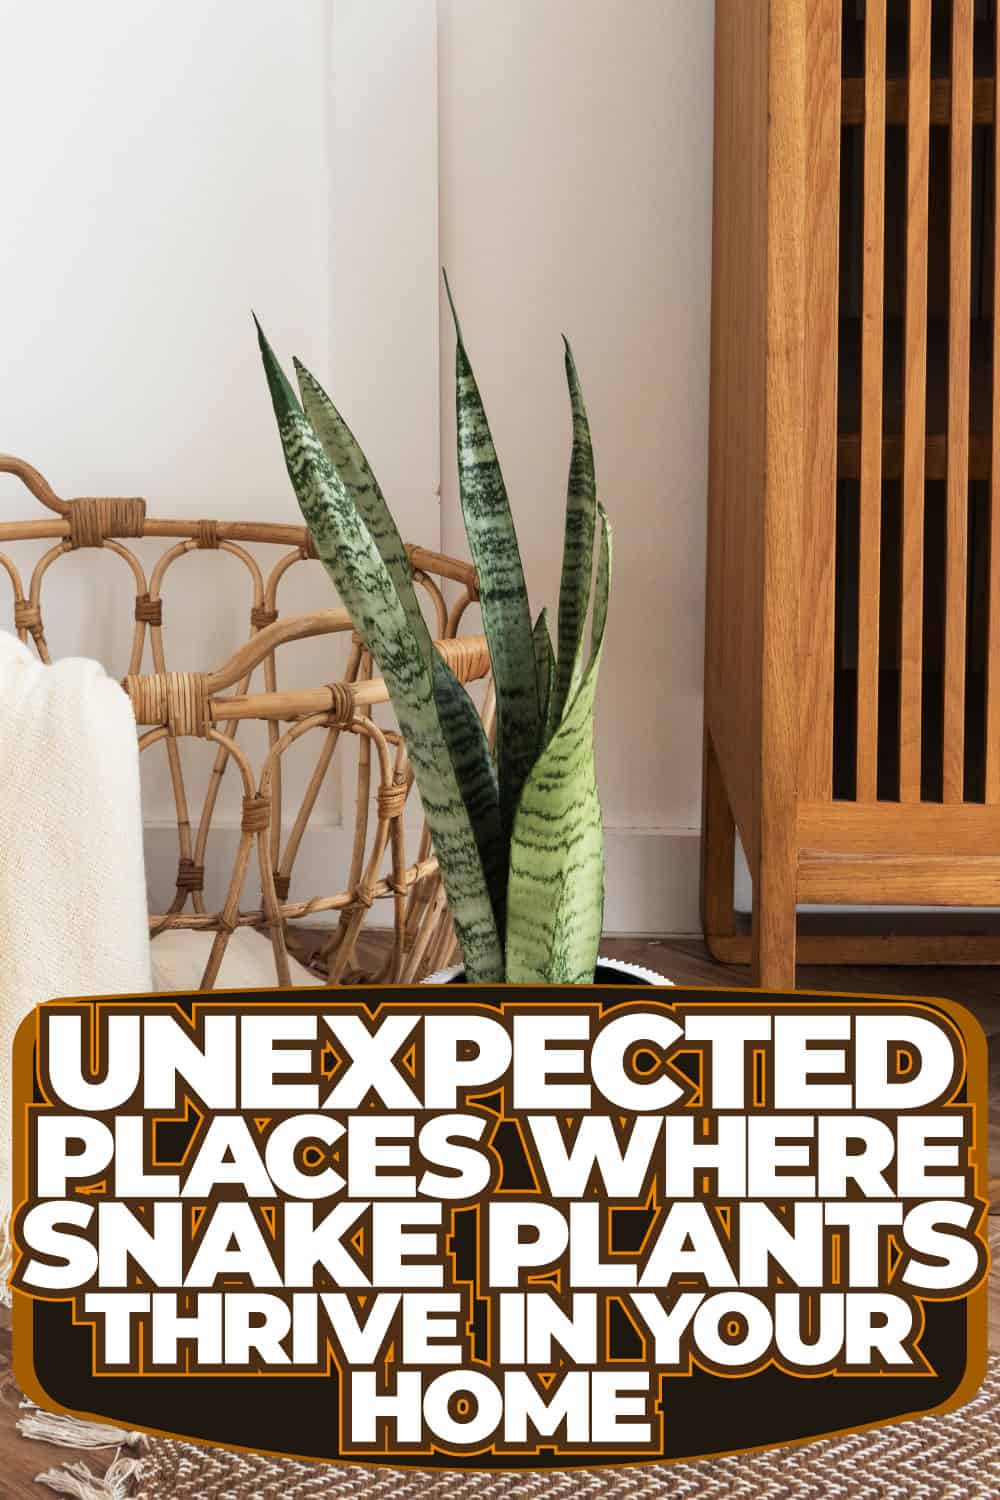 Unexpected Places Where Snake Plants Thrive in Your Home